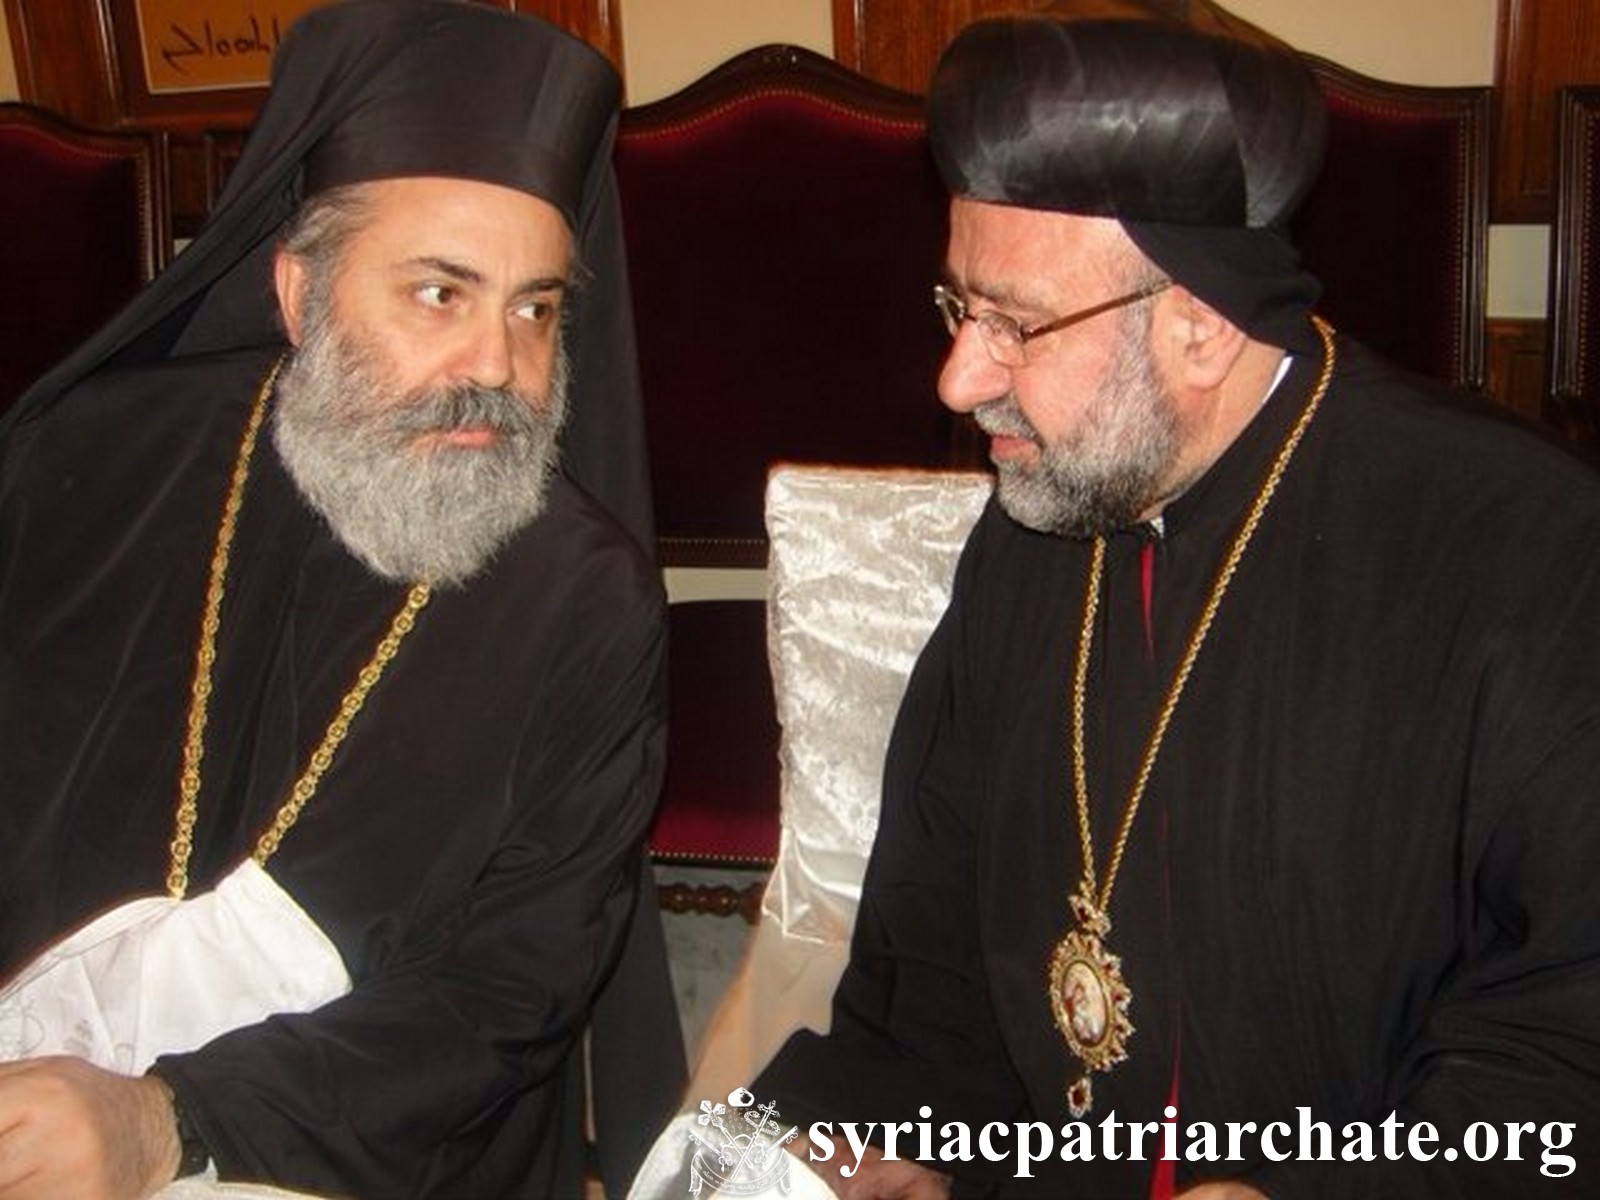 Common Statement – The Five-Year Anniversary of the Abducted Bishops of Aleppo